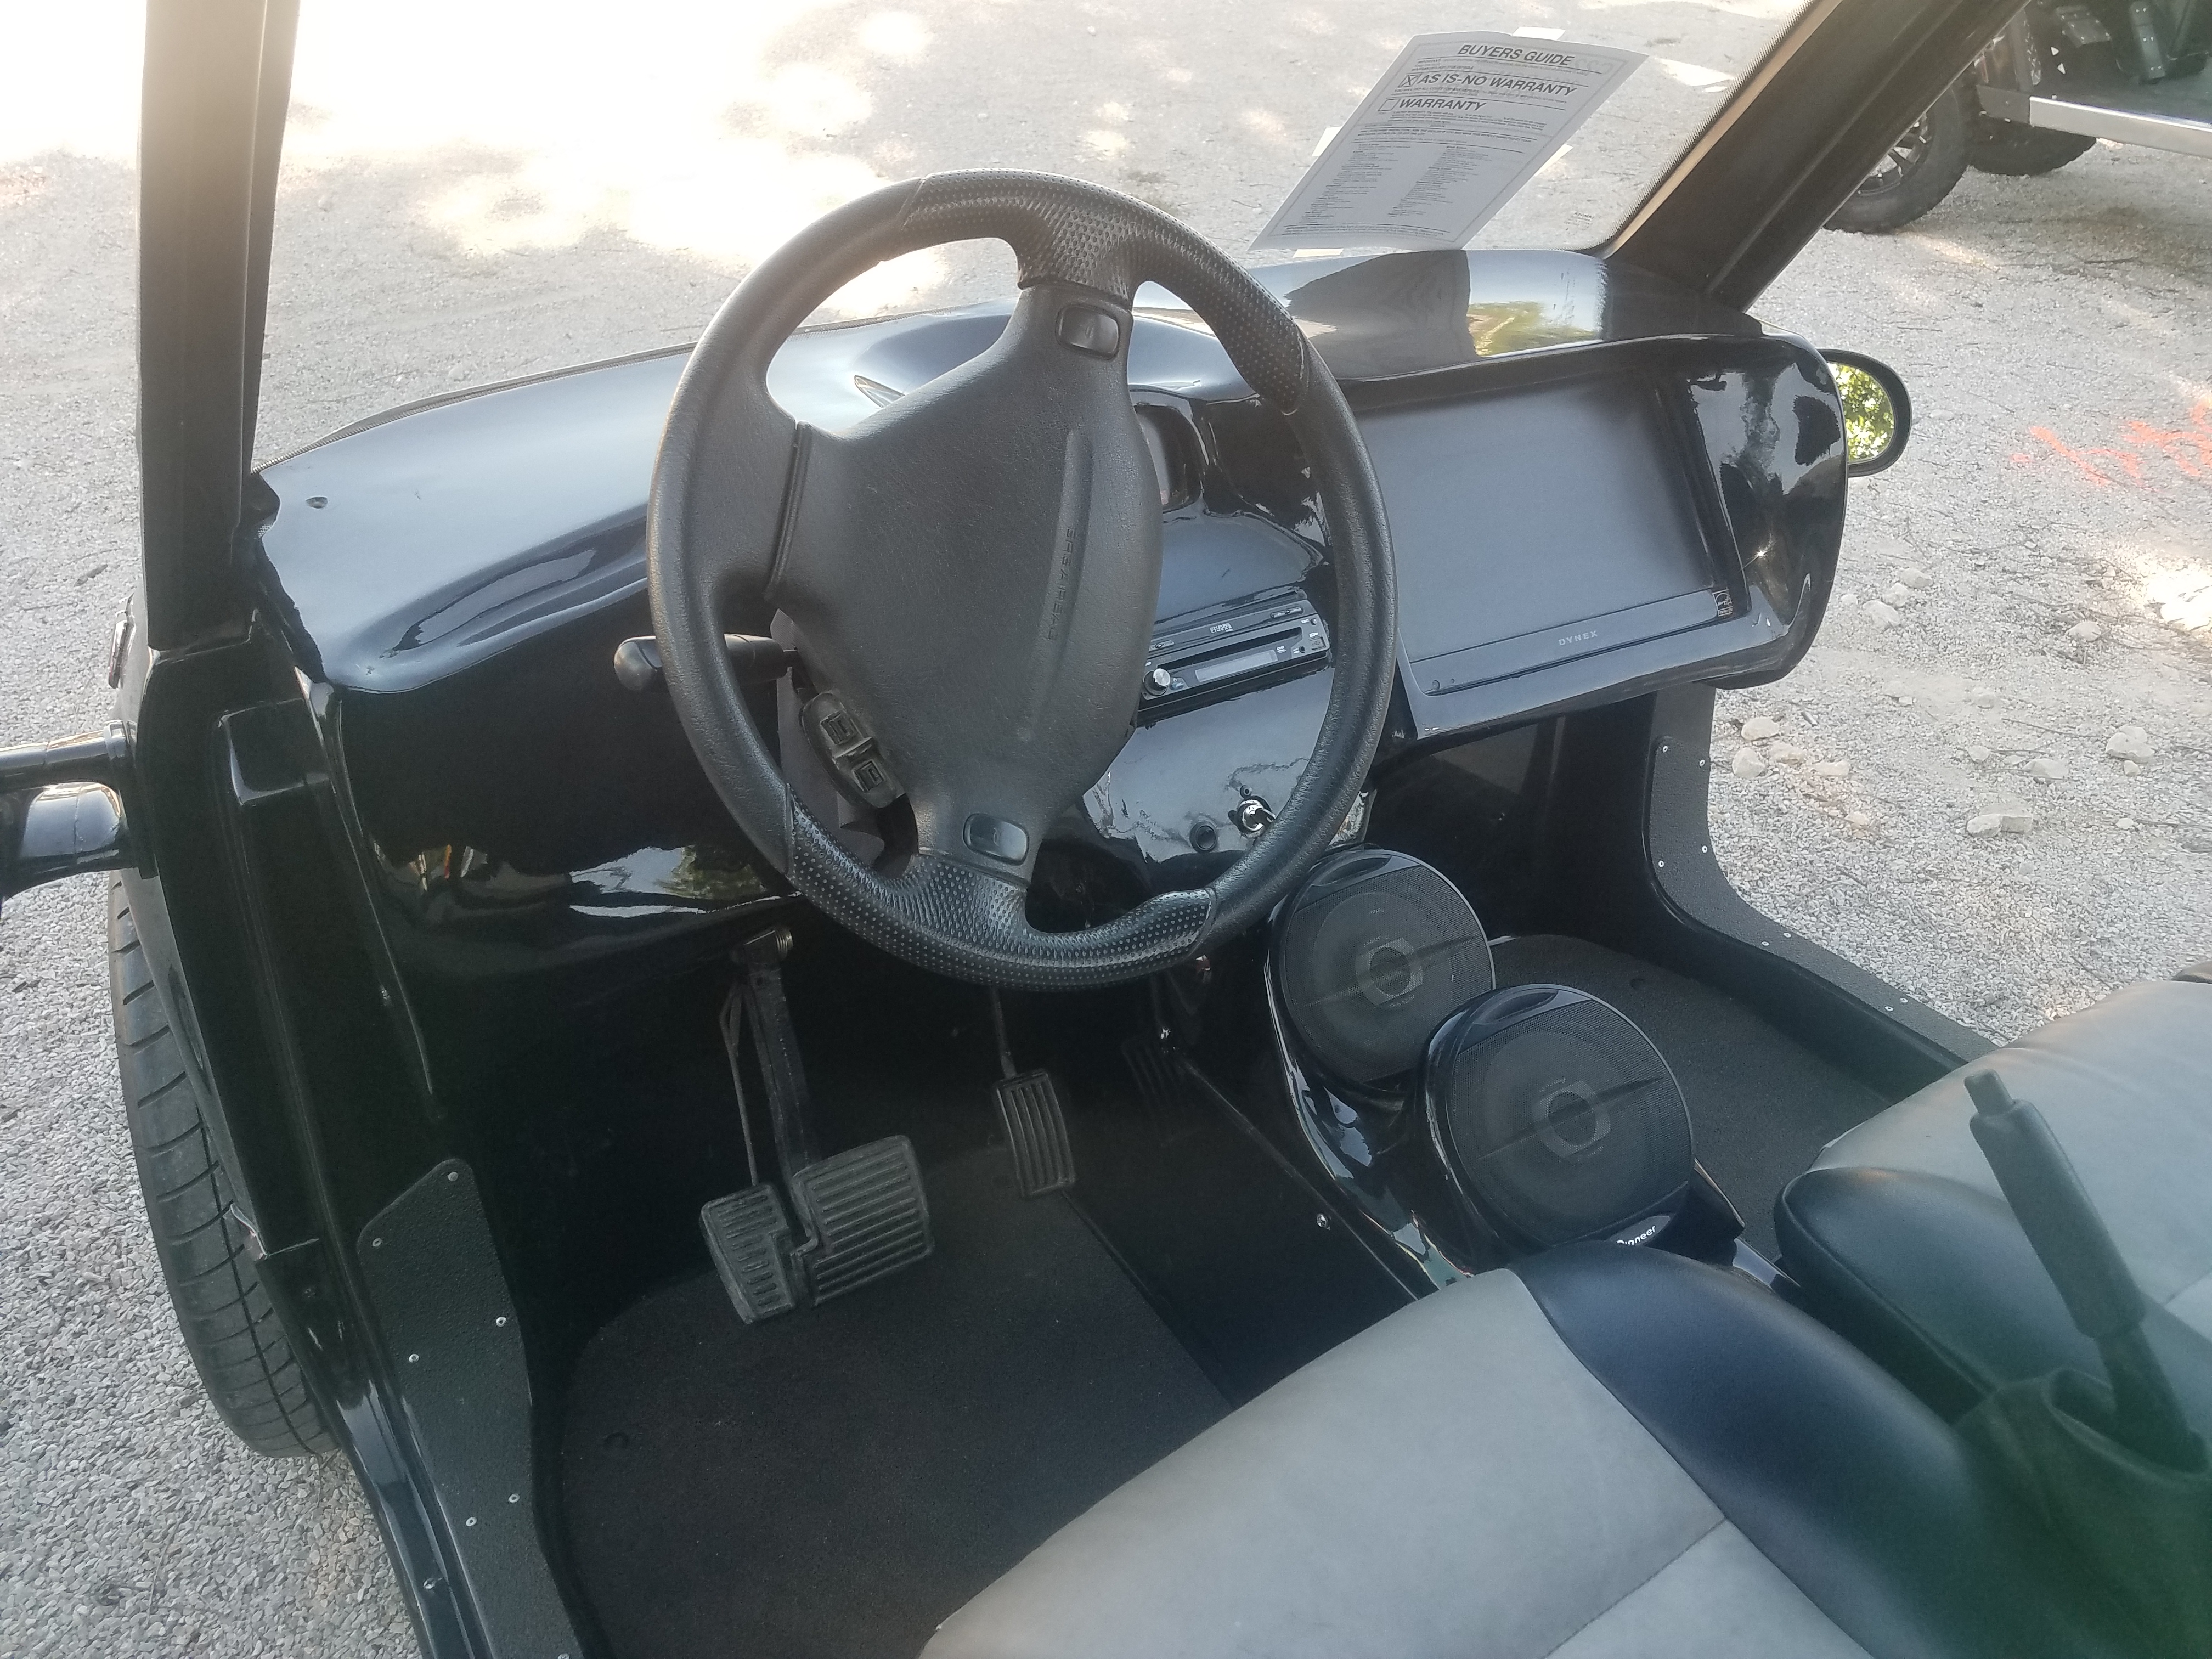 3rd Image of a 2010 BOMBARDIER GOLF CART